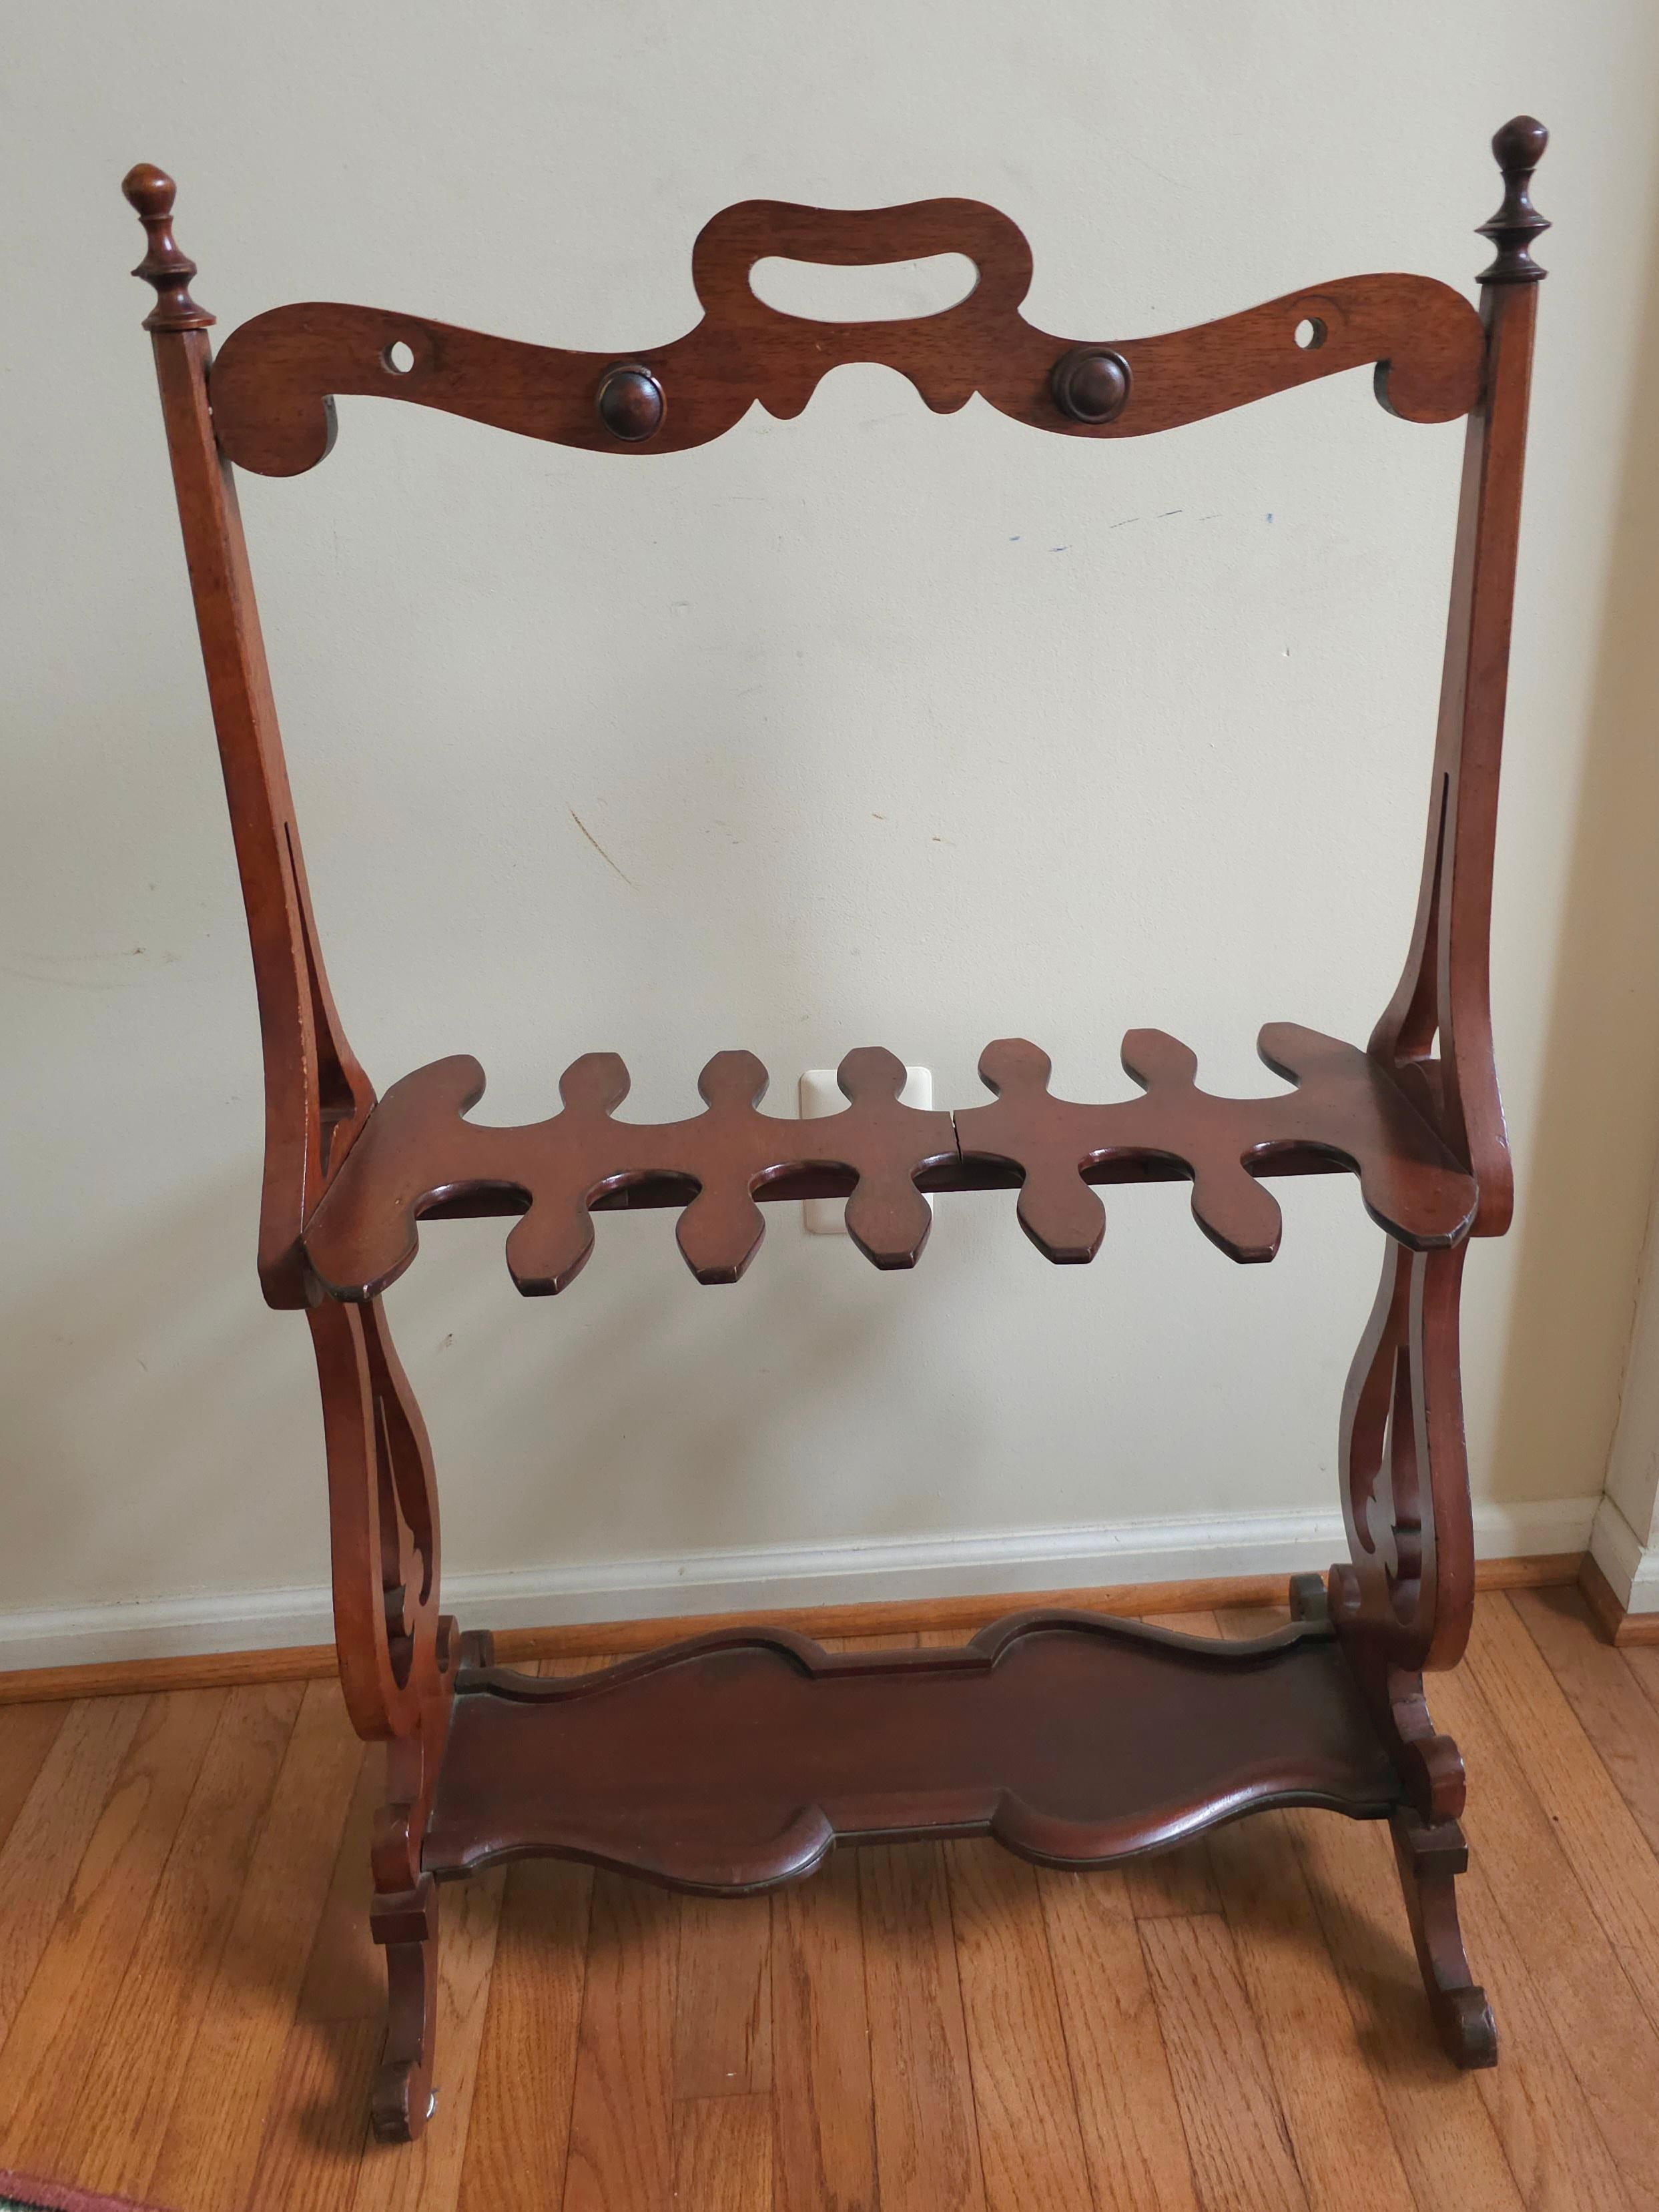 Early American Style Mahogany Riding Boot Rack In Good Condition For Sale In Germantown, MD